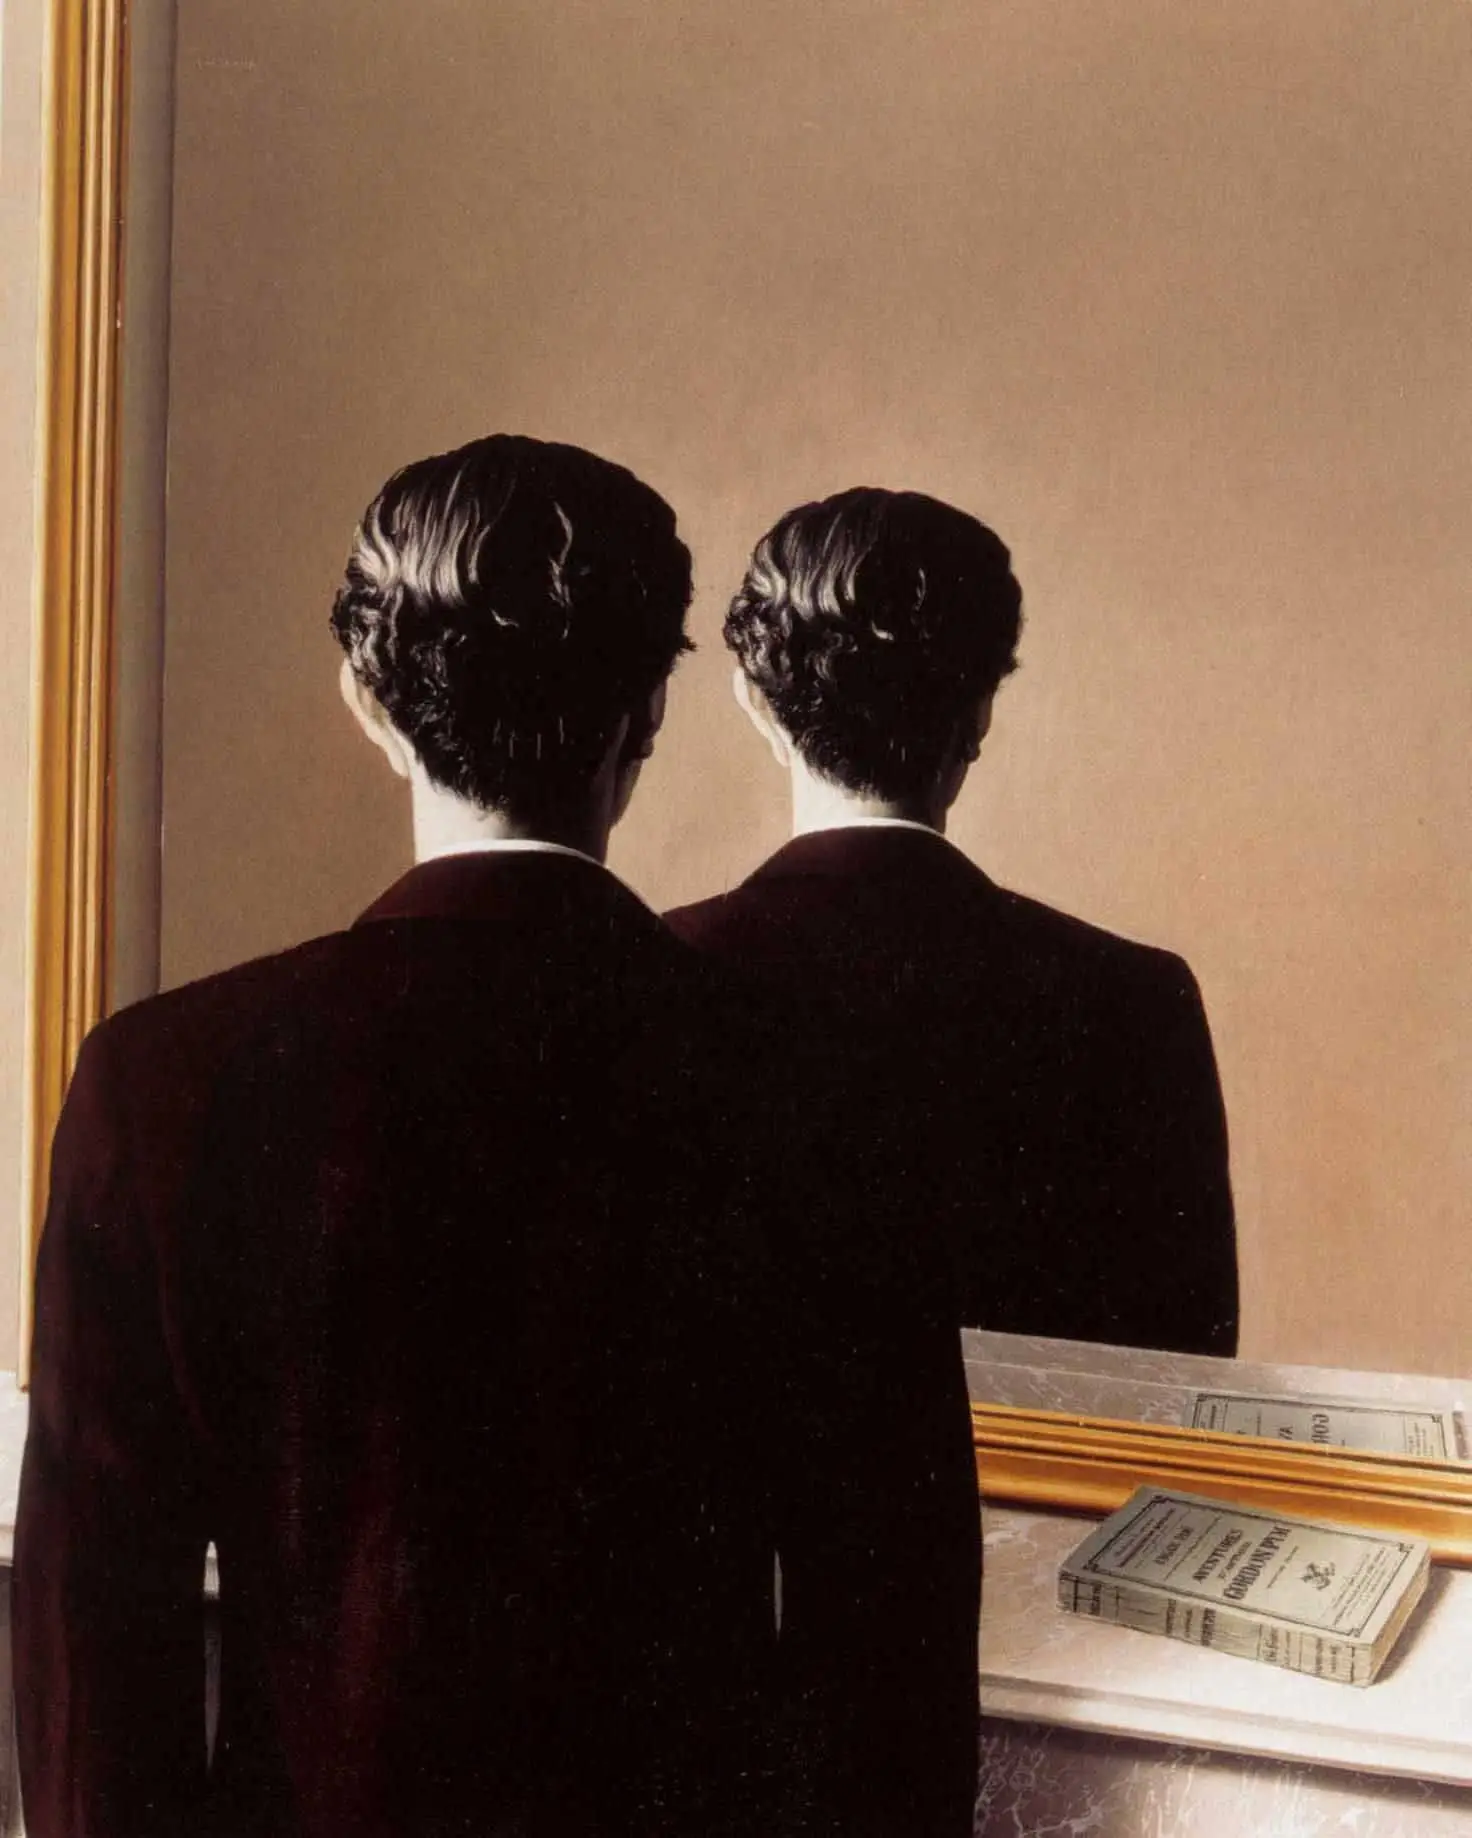 Not to be Reproduced, 1937 by Rene Magritte - Analysis and Interpretation